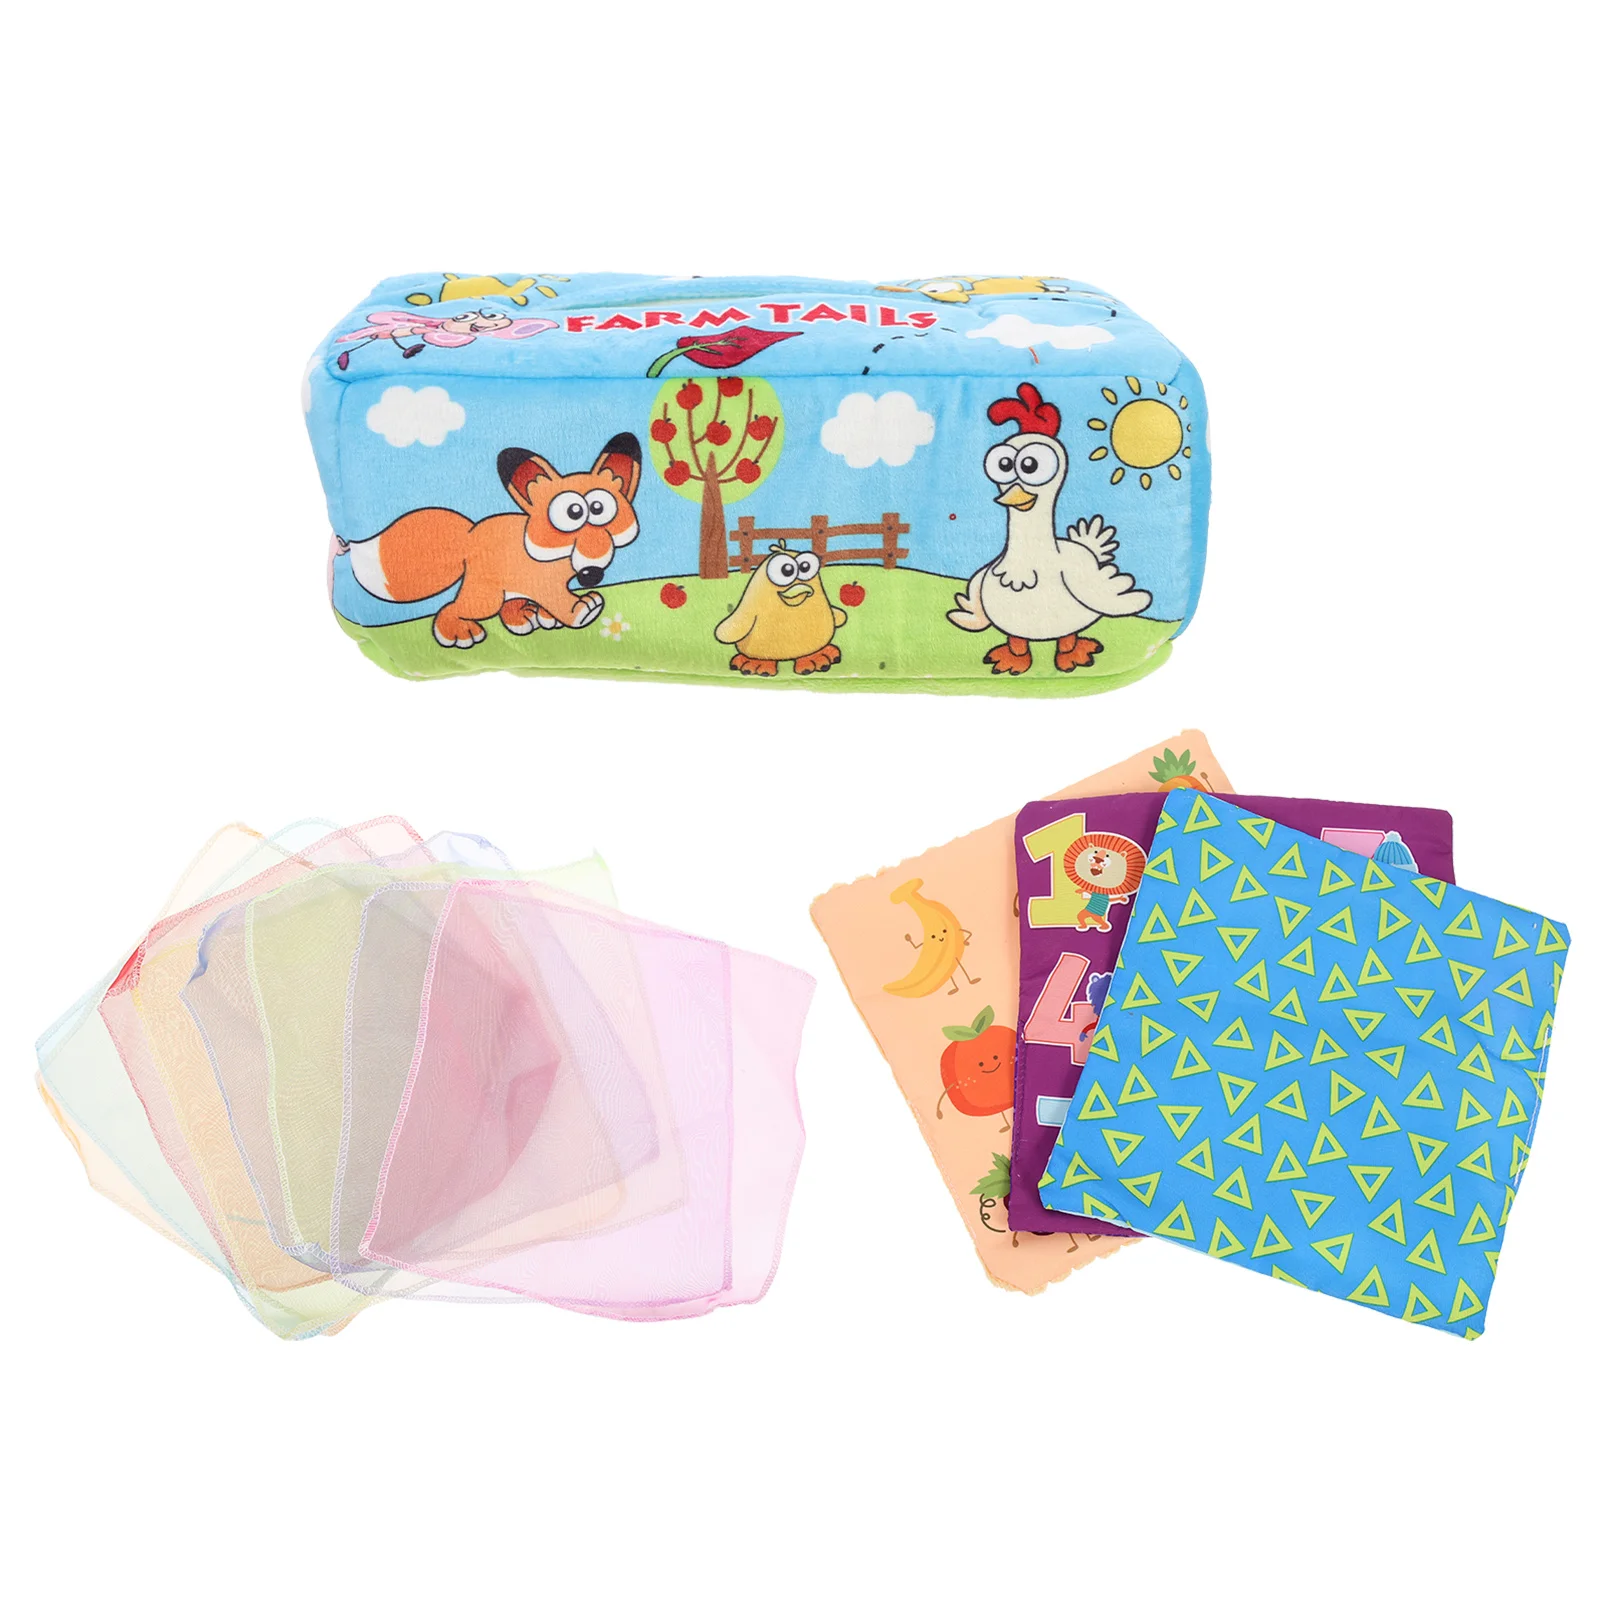 

1 Set Creative Napkin Box Playthings Interesting Tissue Box Baby Toys Educational Playthings for Toddler Gift